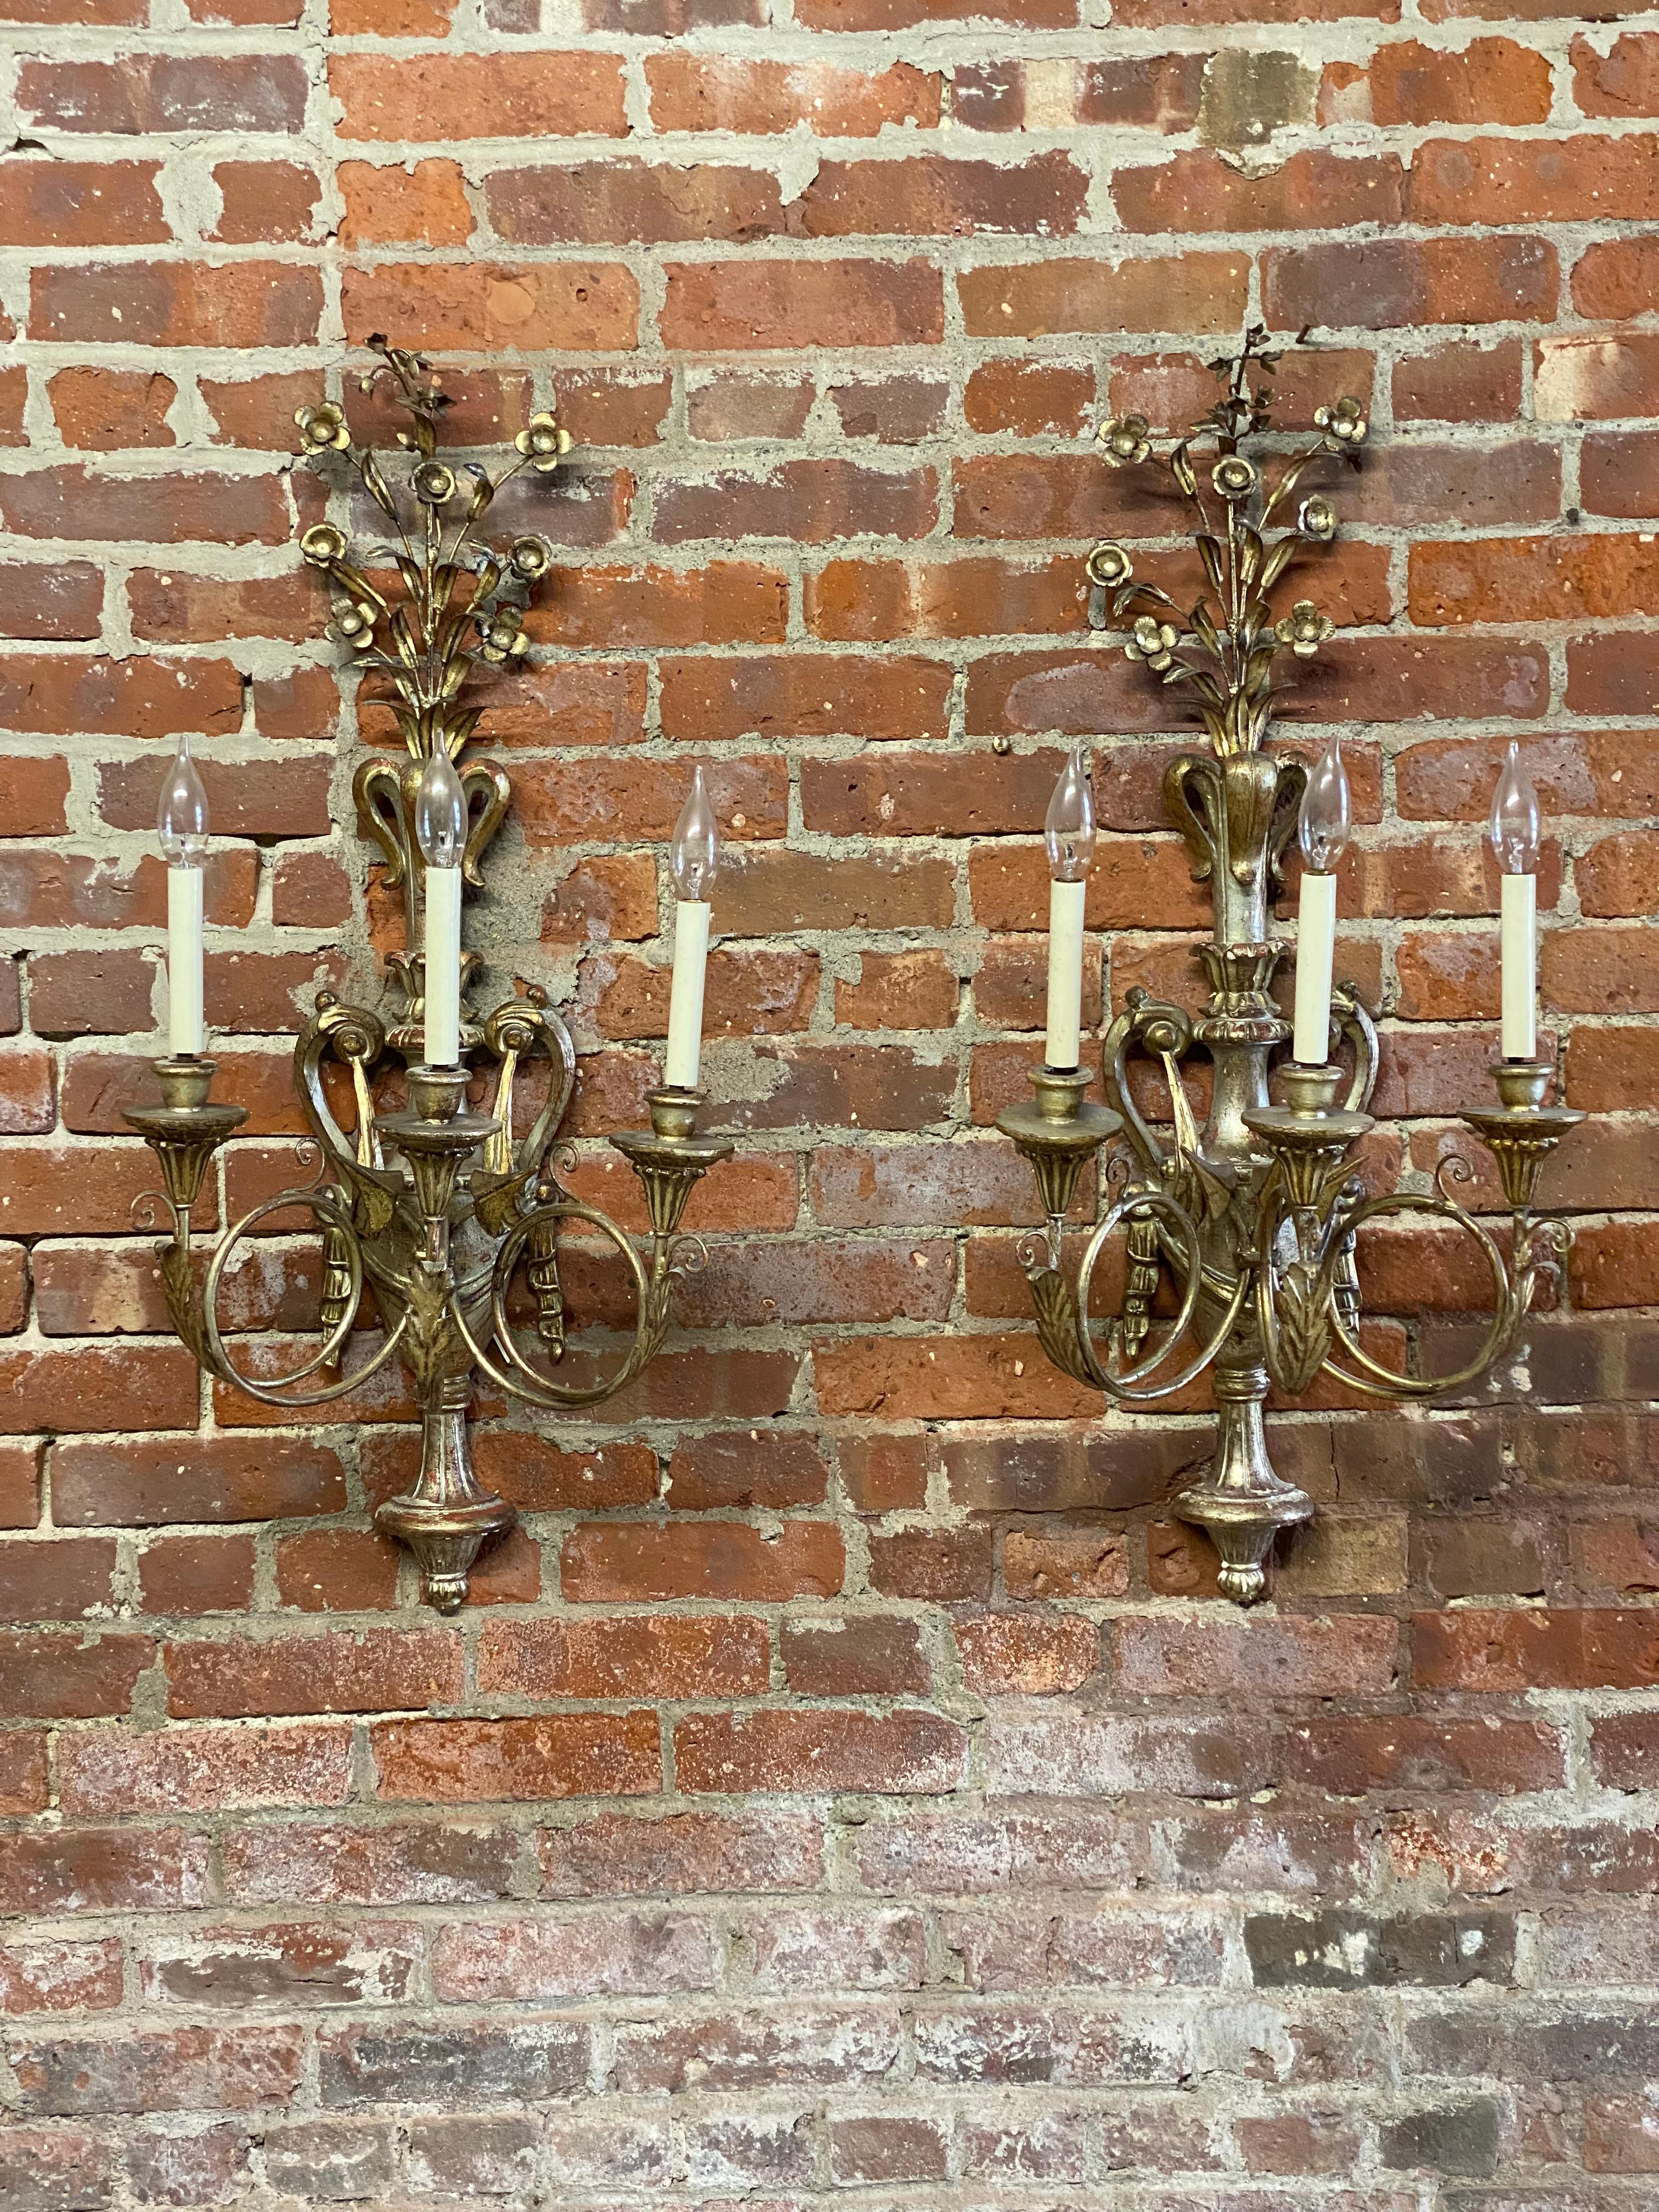 A sumptuous pair of Italian Baroque style silver gilt metal and carved wood scrolled and foliate wall sconces. Imported from Italy circa 1950-60 by the family I purchased these from. The pair has an amazing presence and has just the amount of patina